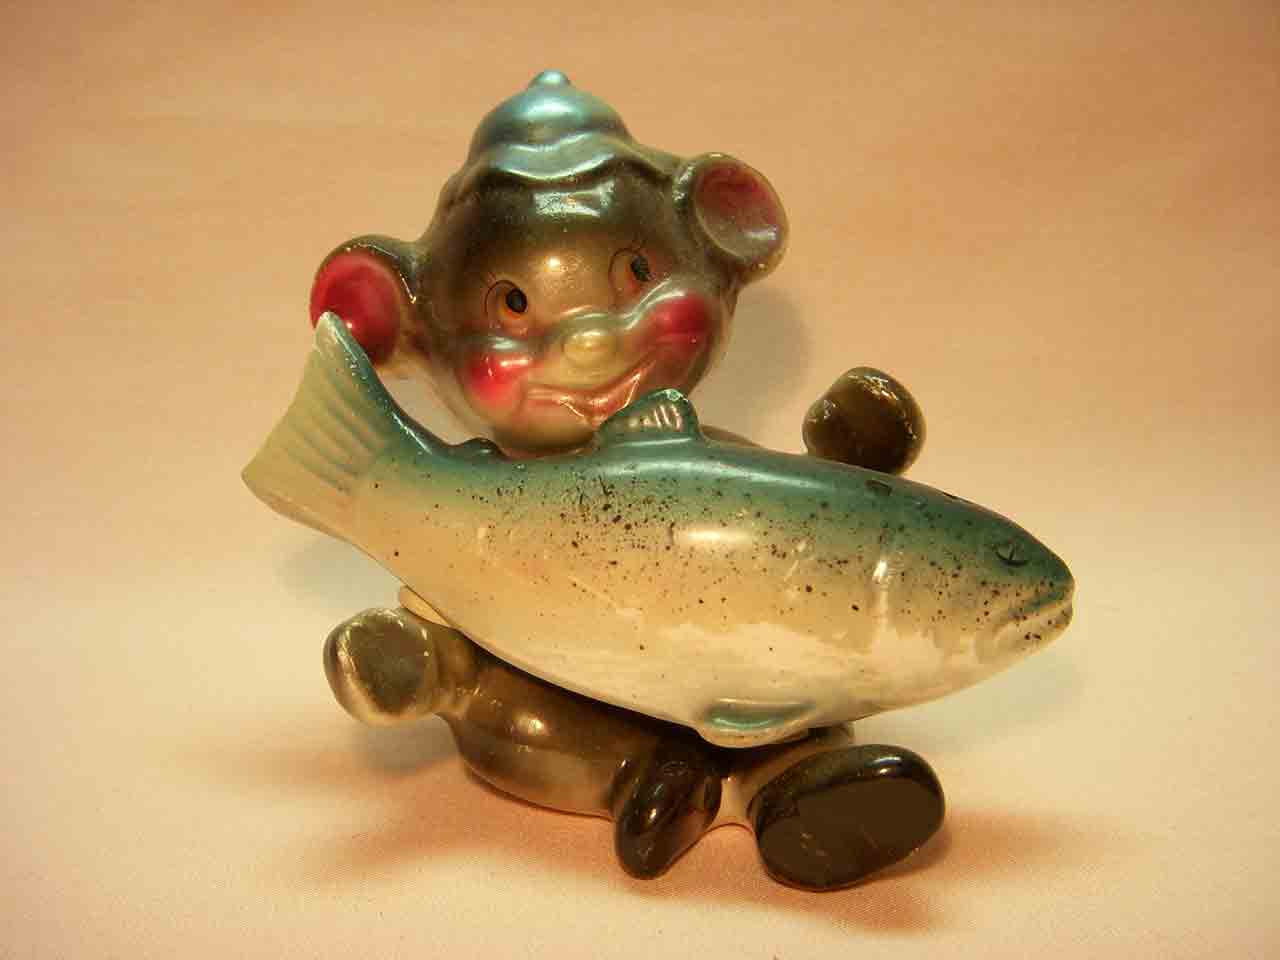 Shiny anthropomorphic bear holding fish salt and pepper shakers